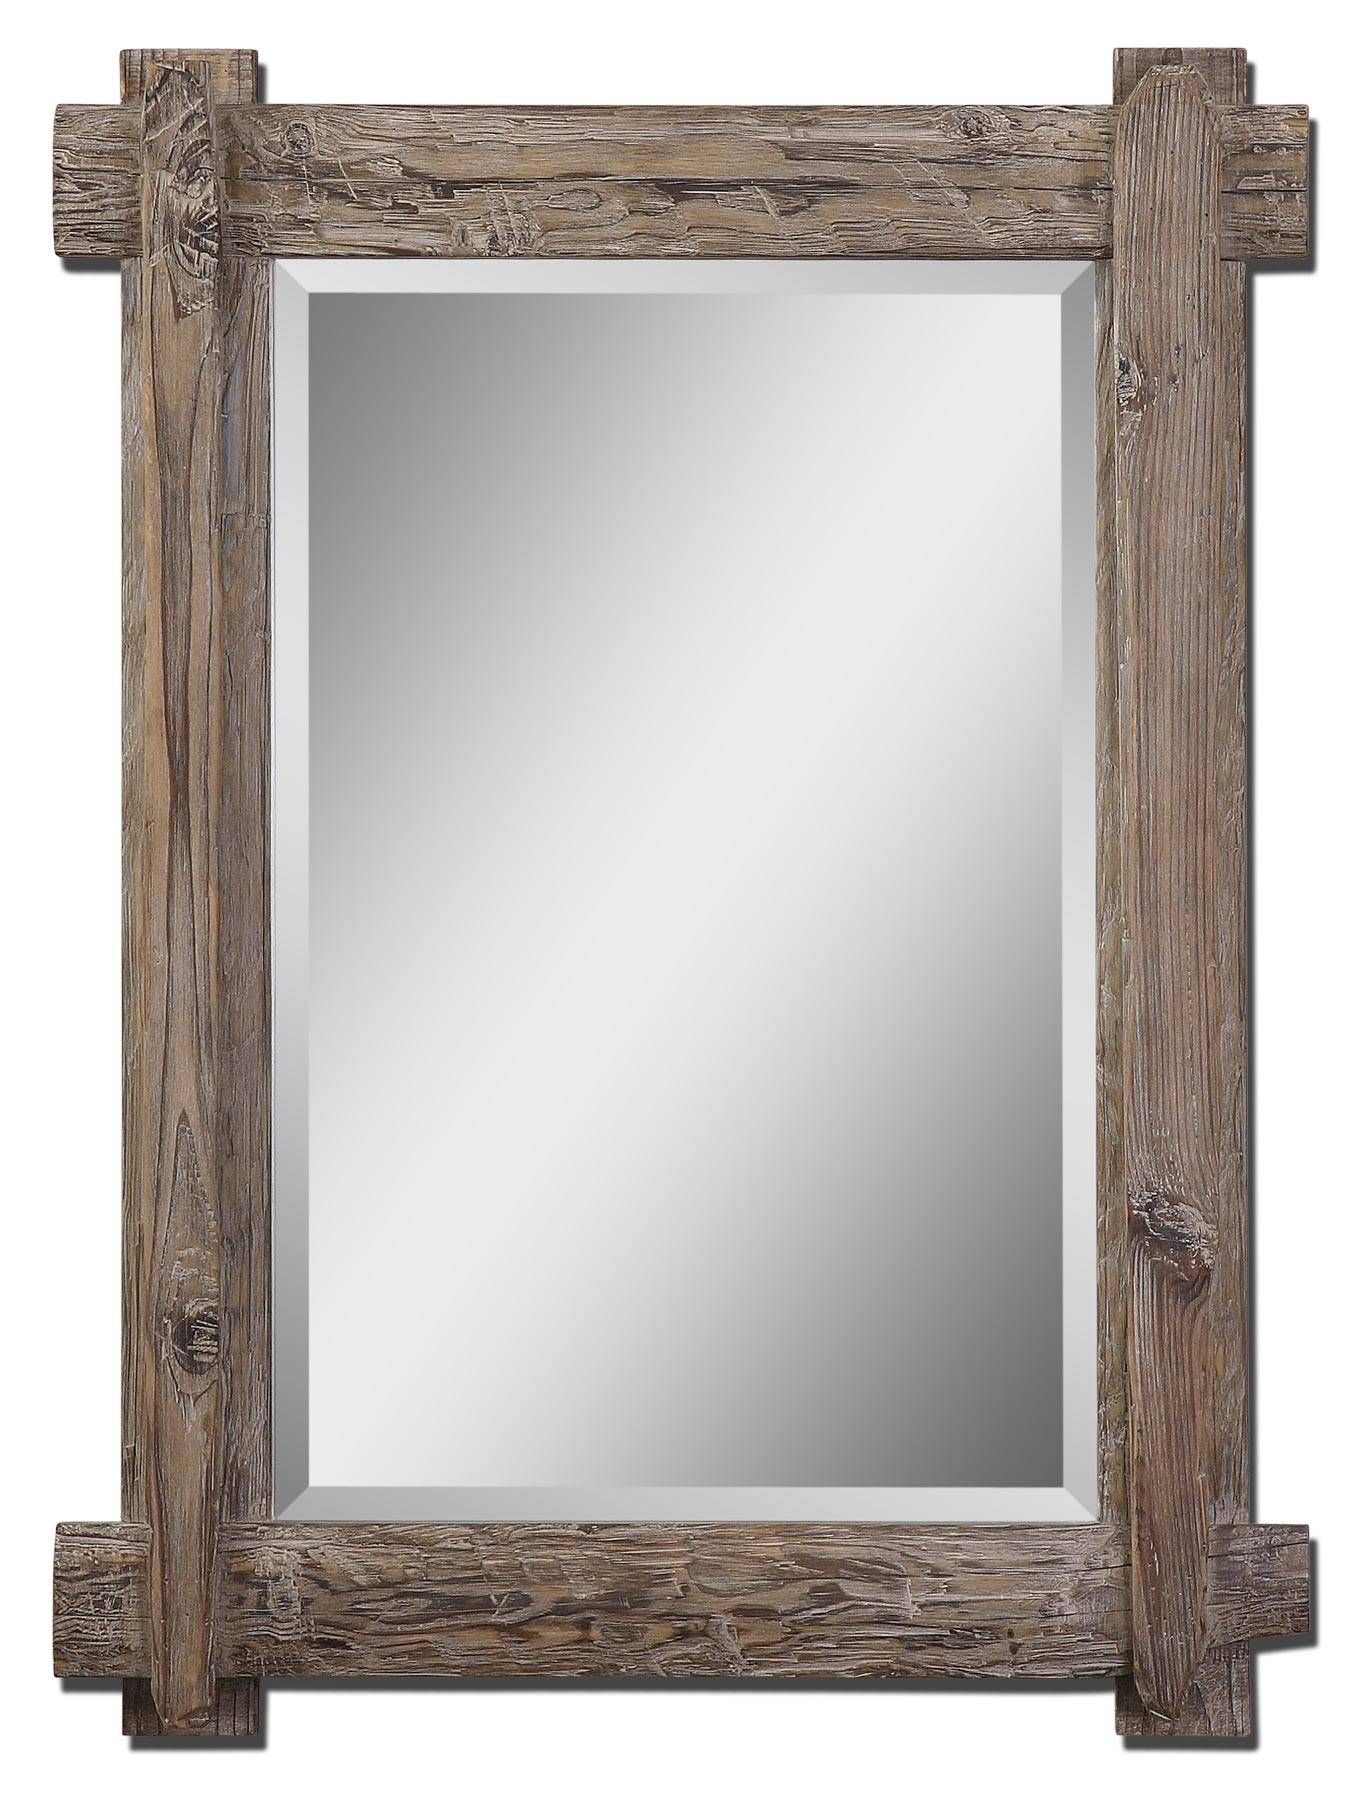 Framed Mirrors | Inovodecor In Wooden Mirrors (View 14 of 15)